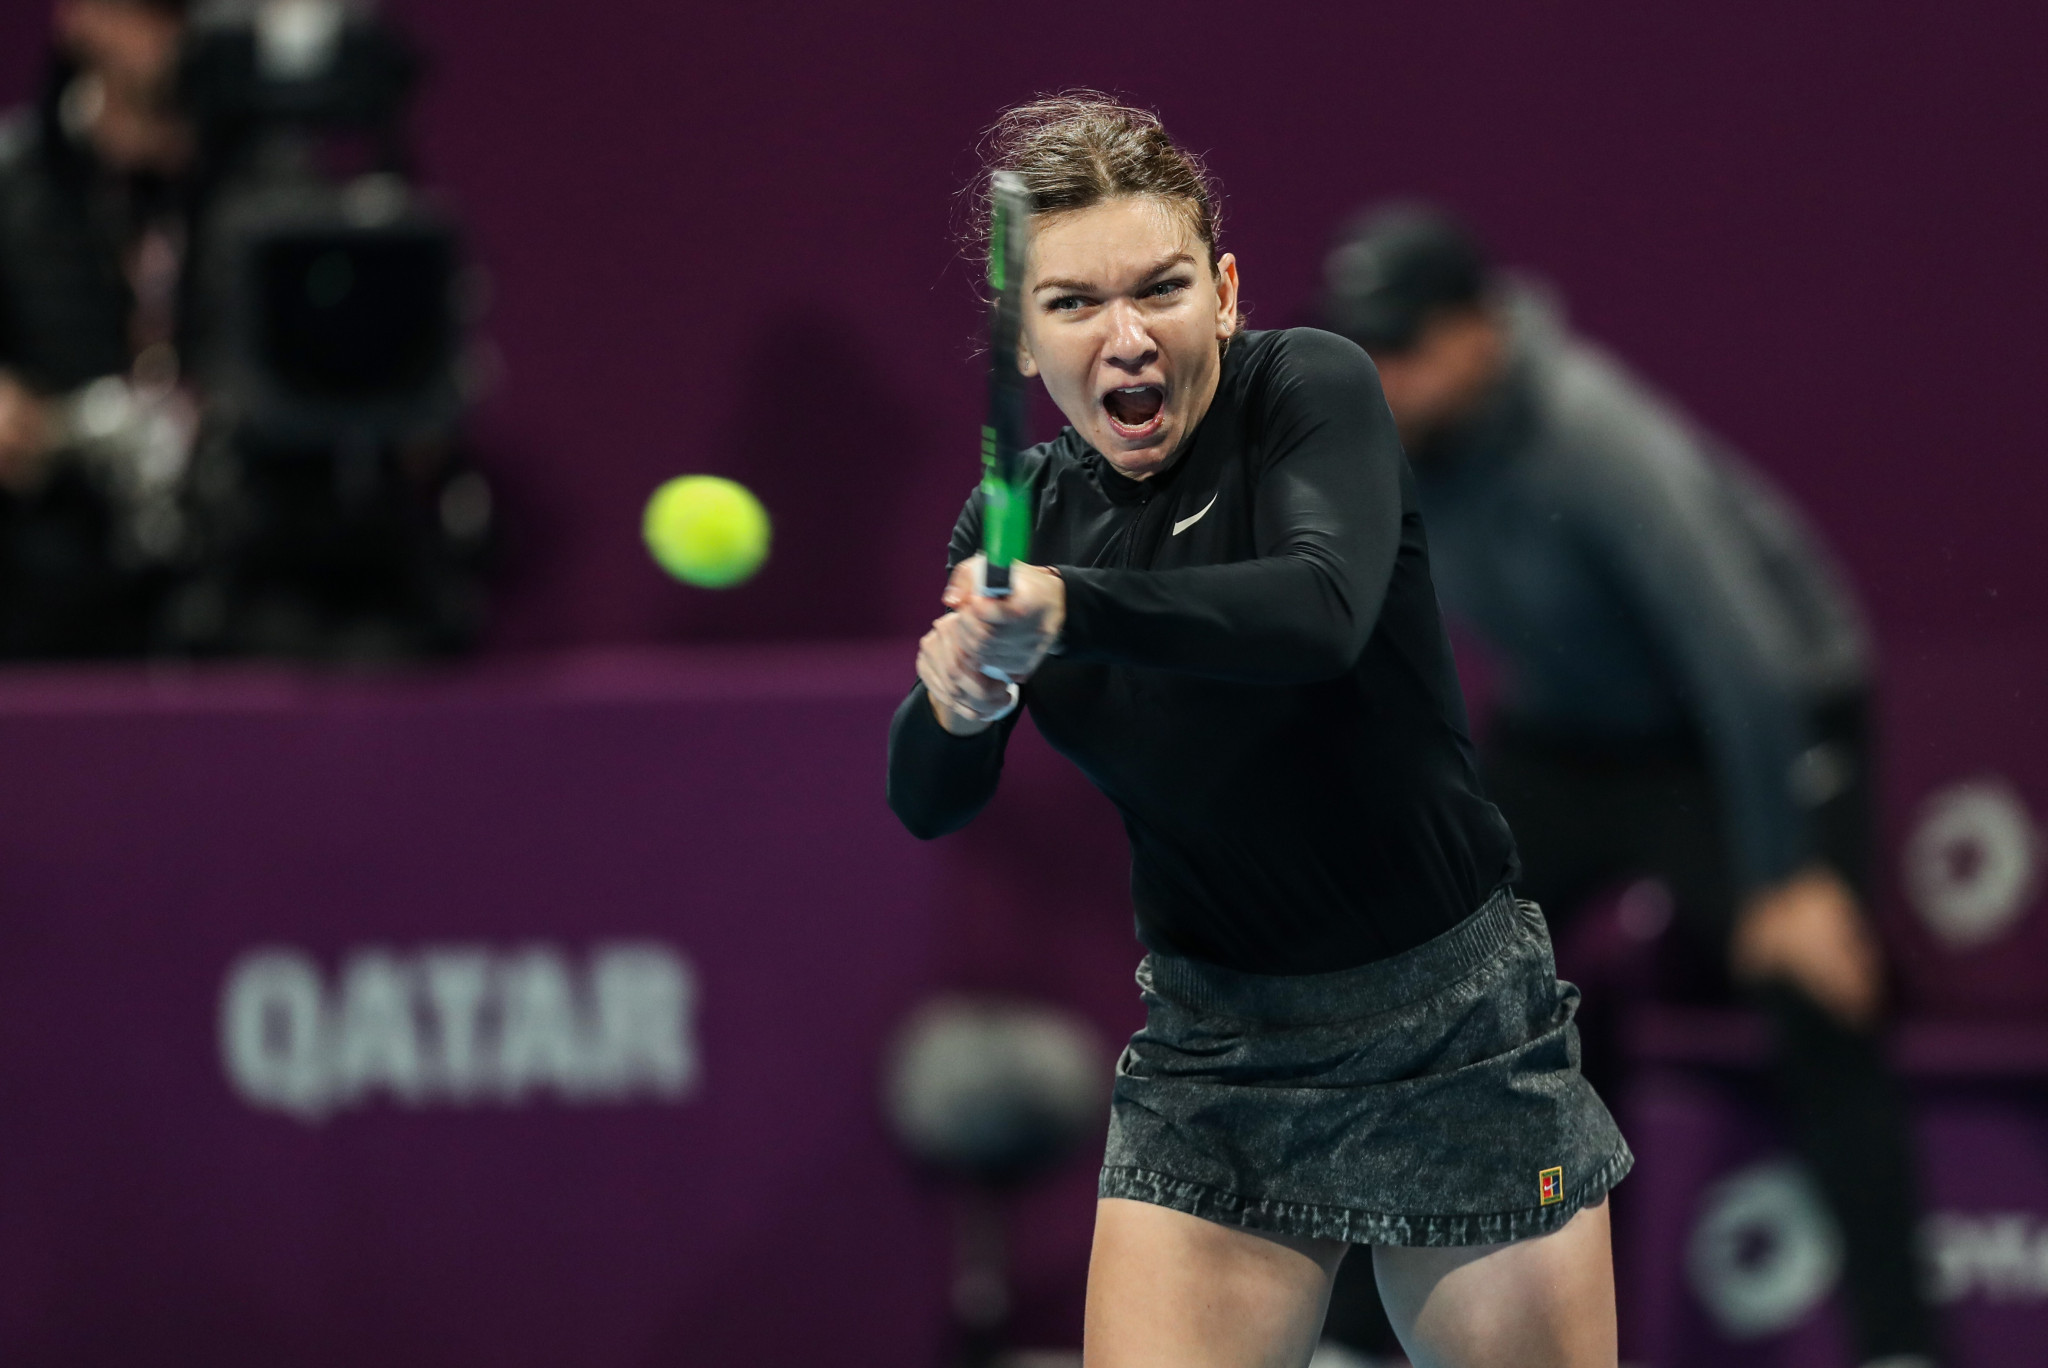 Romania's Simona Halep won her quarter-final at the WTA Qatar Open to progress to the semi-final ©Getty Images